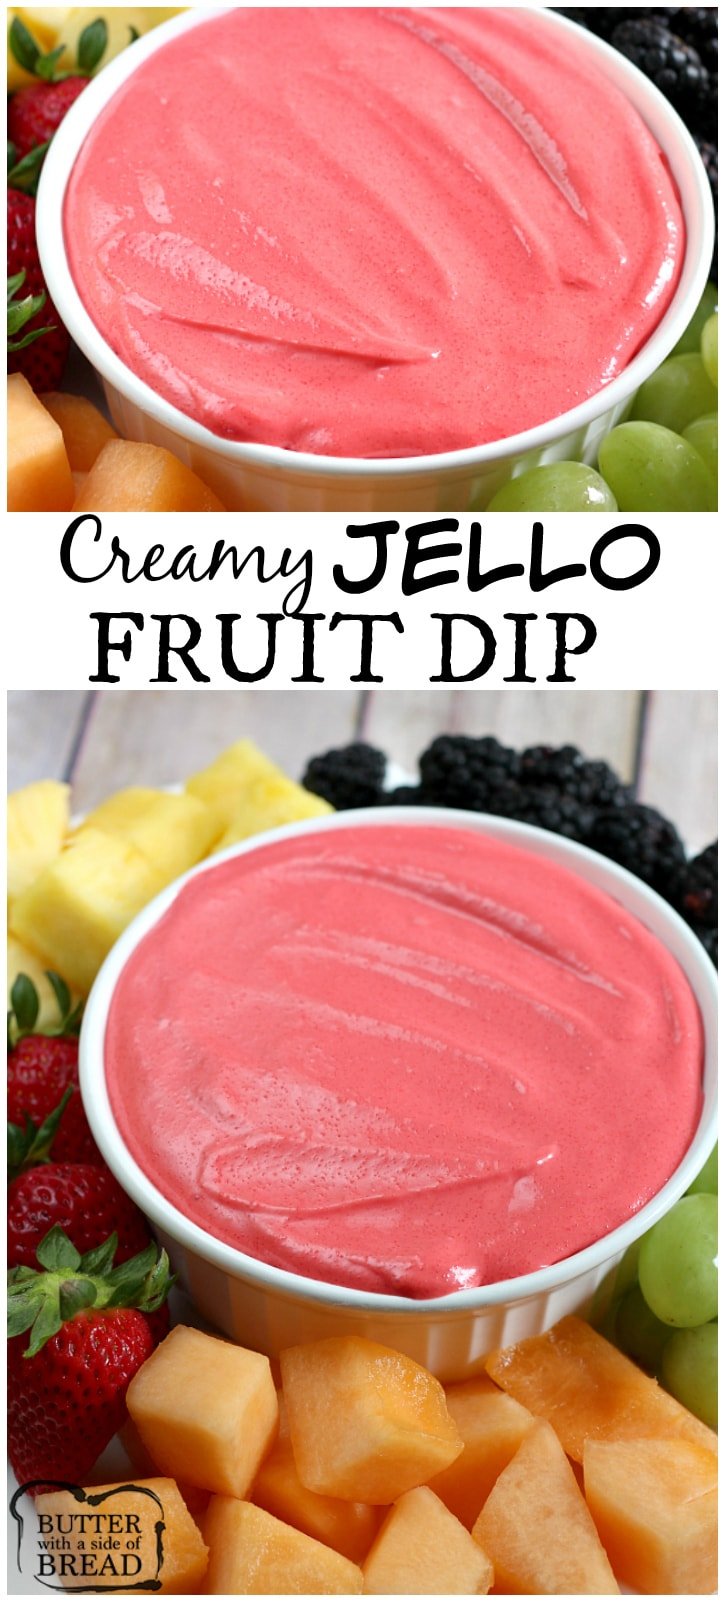 Creamy Jello Fruit Dip is made with only 3 ingredients & can be made with any flavor of Jello that you'd like. It's the perfect dip for all of your favorite fruits! Easy recipe from Butter With A Side of Bread